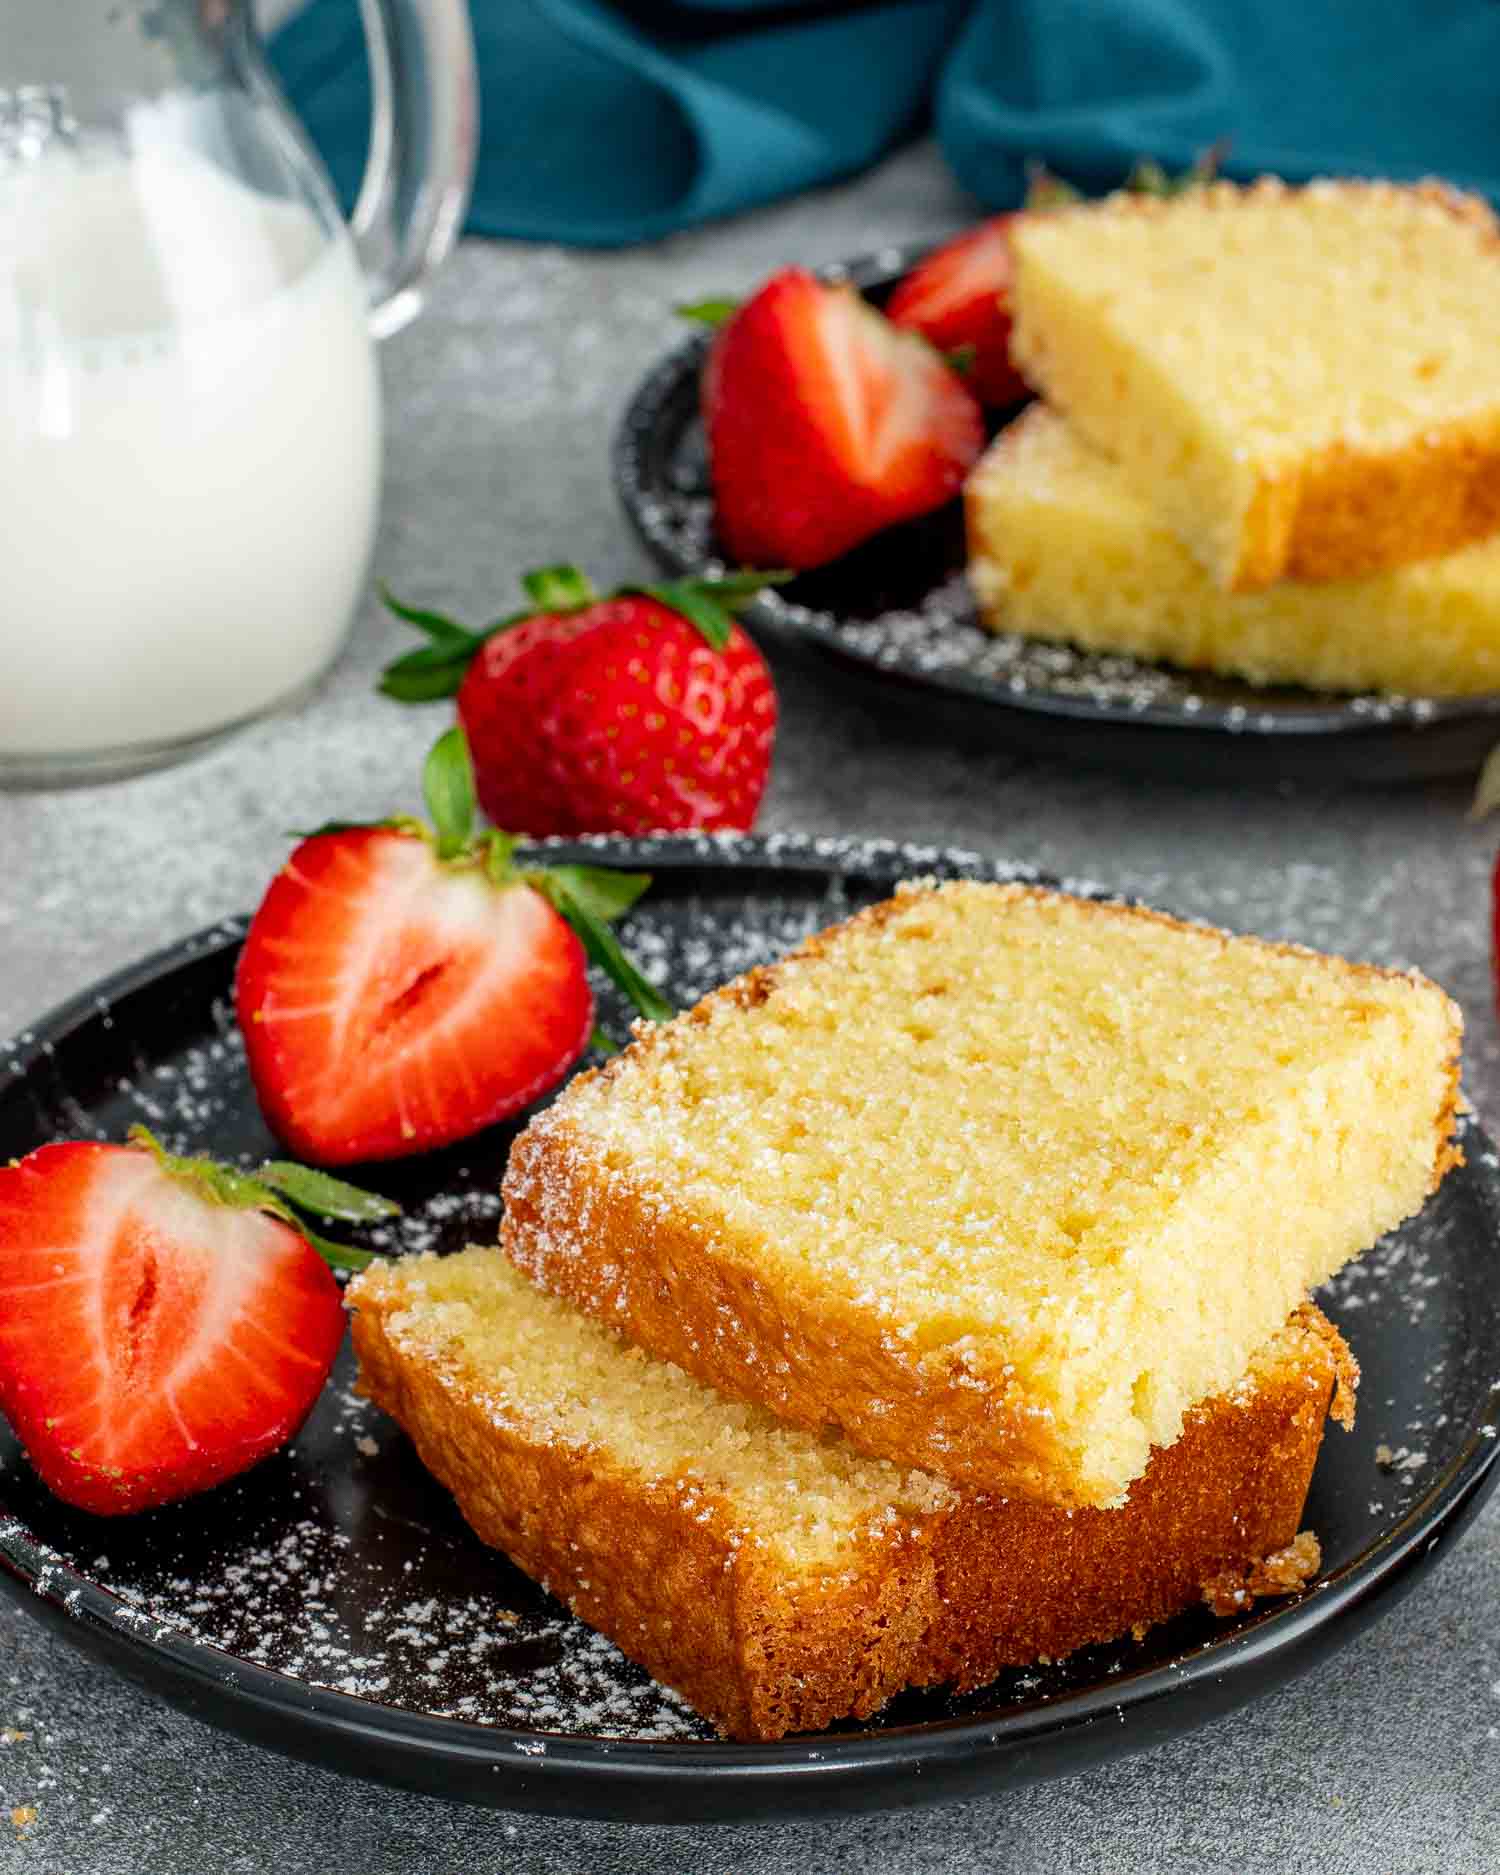 a couple slices of freshly baked butter cake along side a couple strawberries on a black plate.